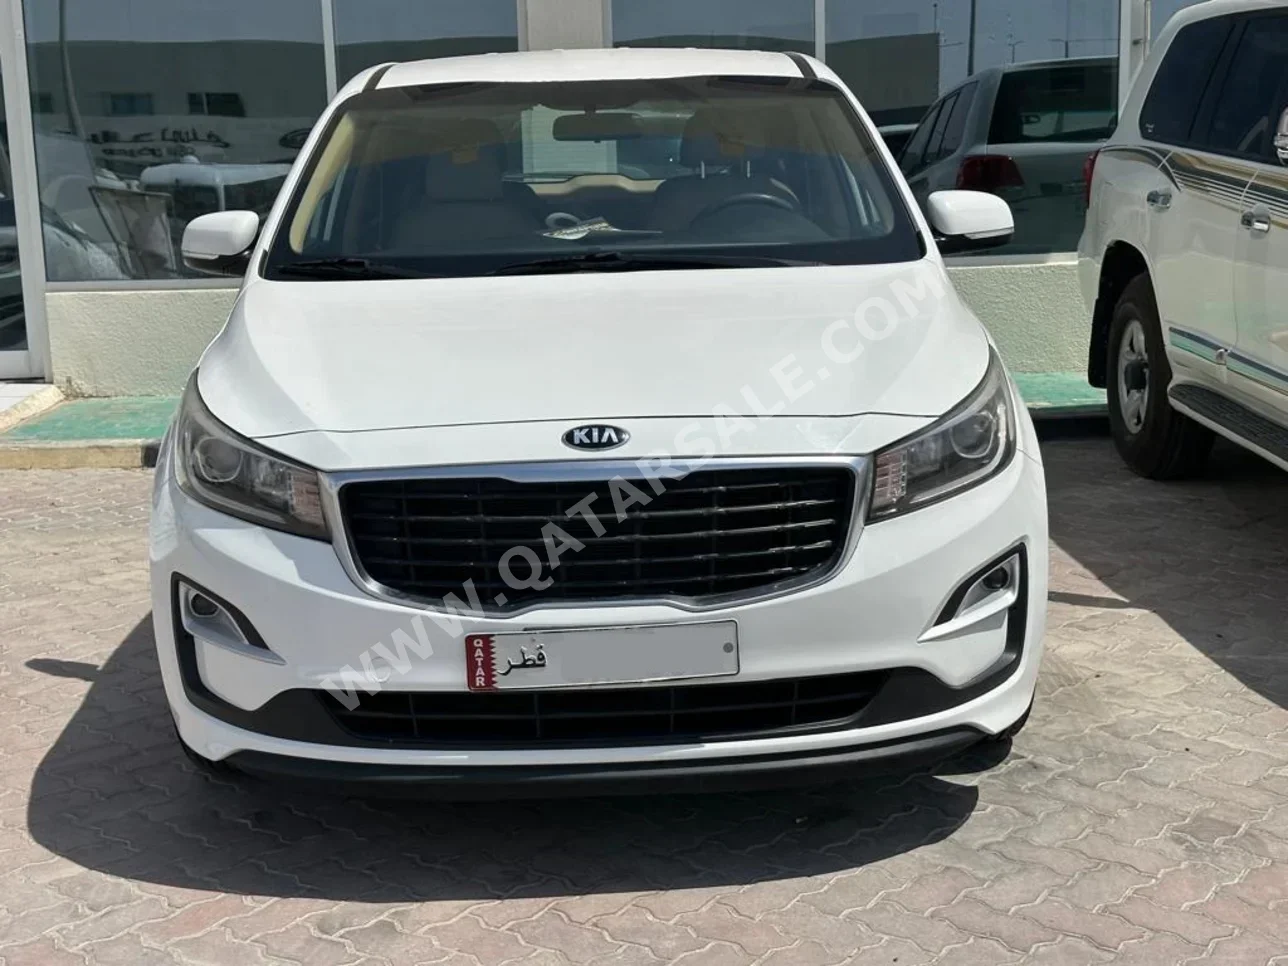 Kia  Carnival  2019  Automatic  194,000 Km  6 Cylinder  Front Wheel Drive (FWD)  Van / Bus  White